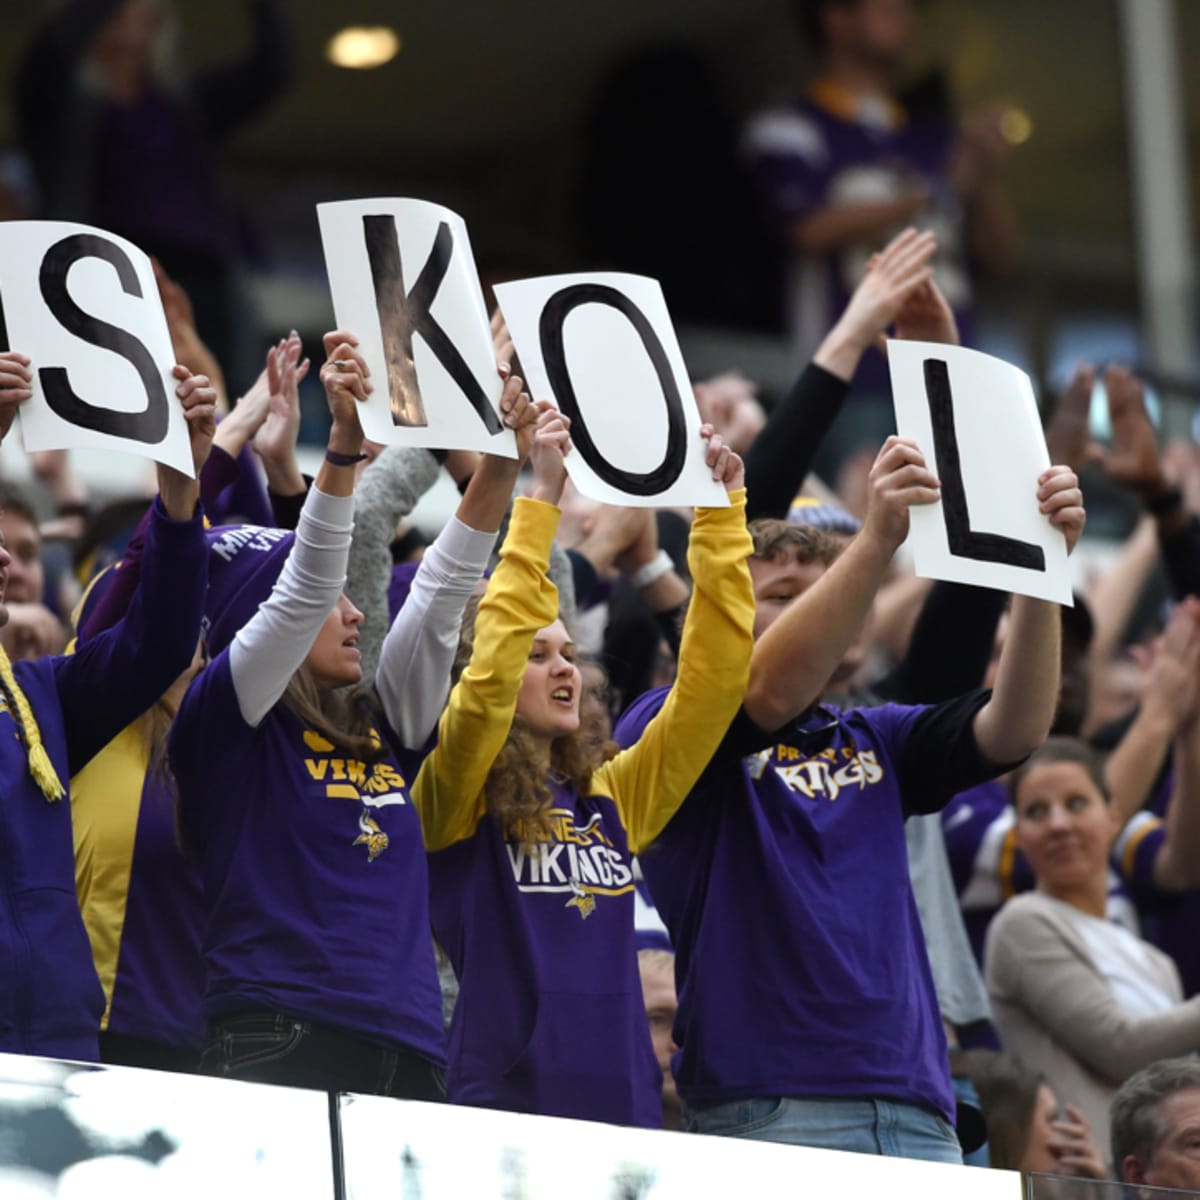 Vikings sports crowd holding the sign that says SKOL